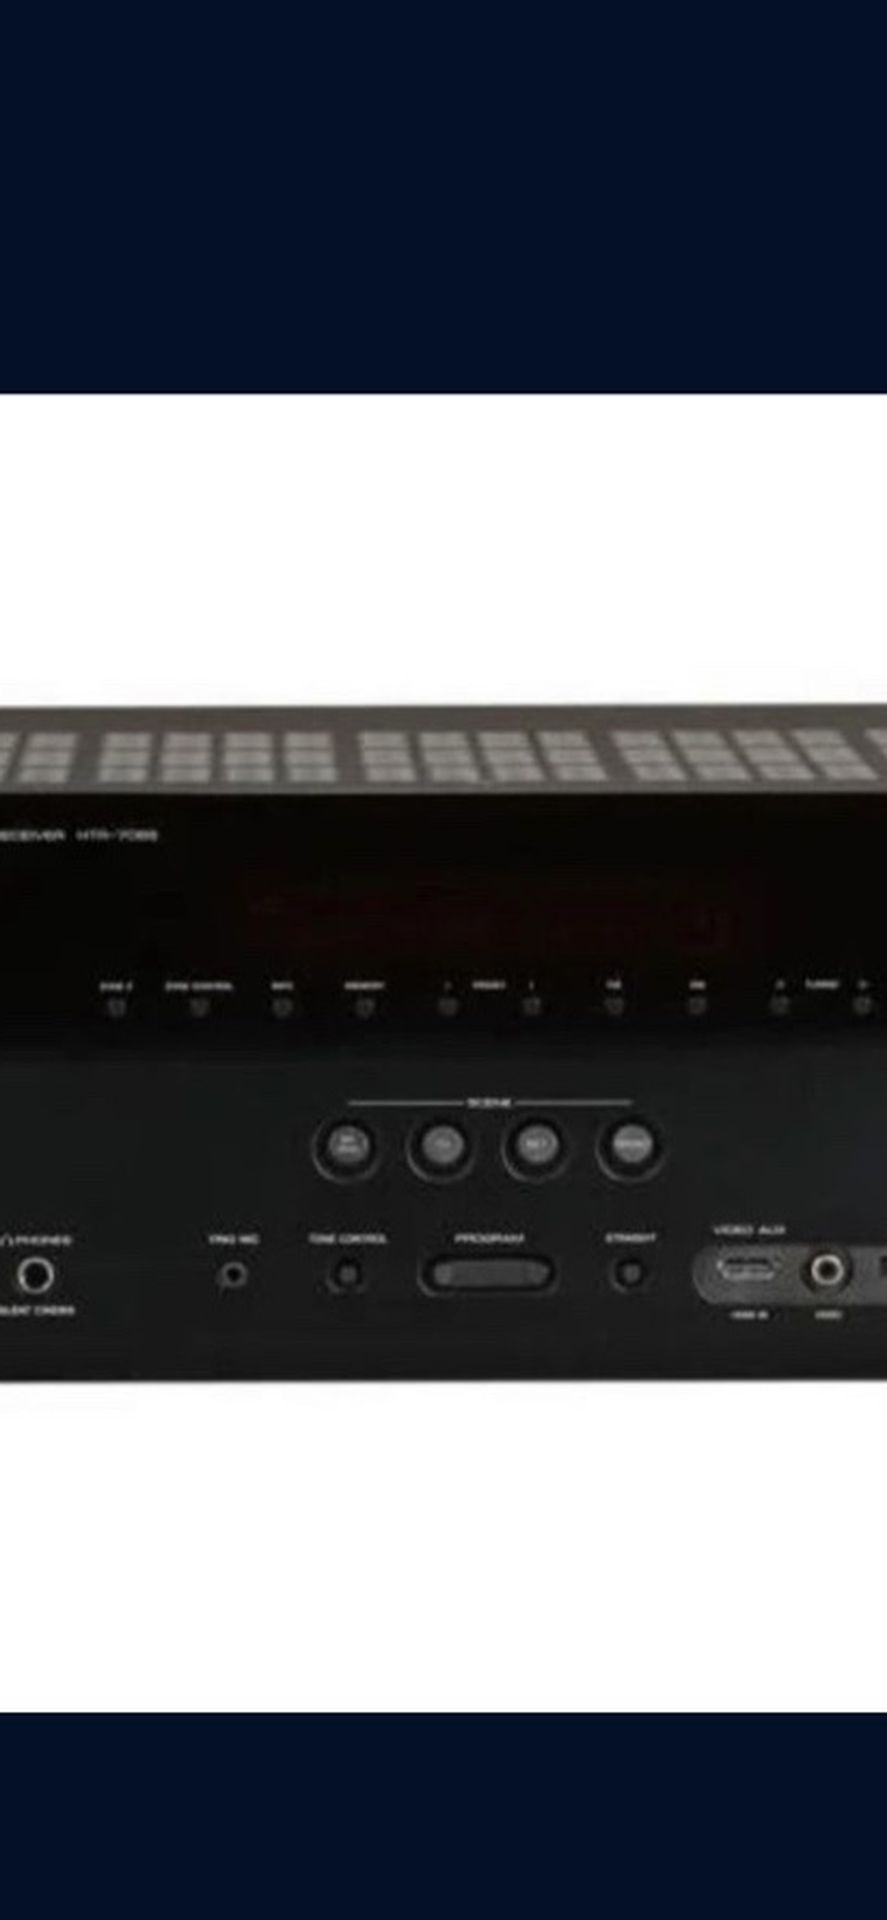 Yamaha Receiver Htr-7065 7.1 Channel